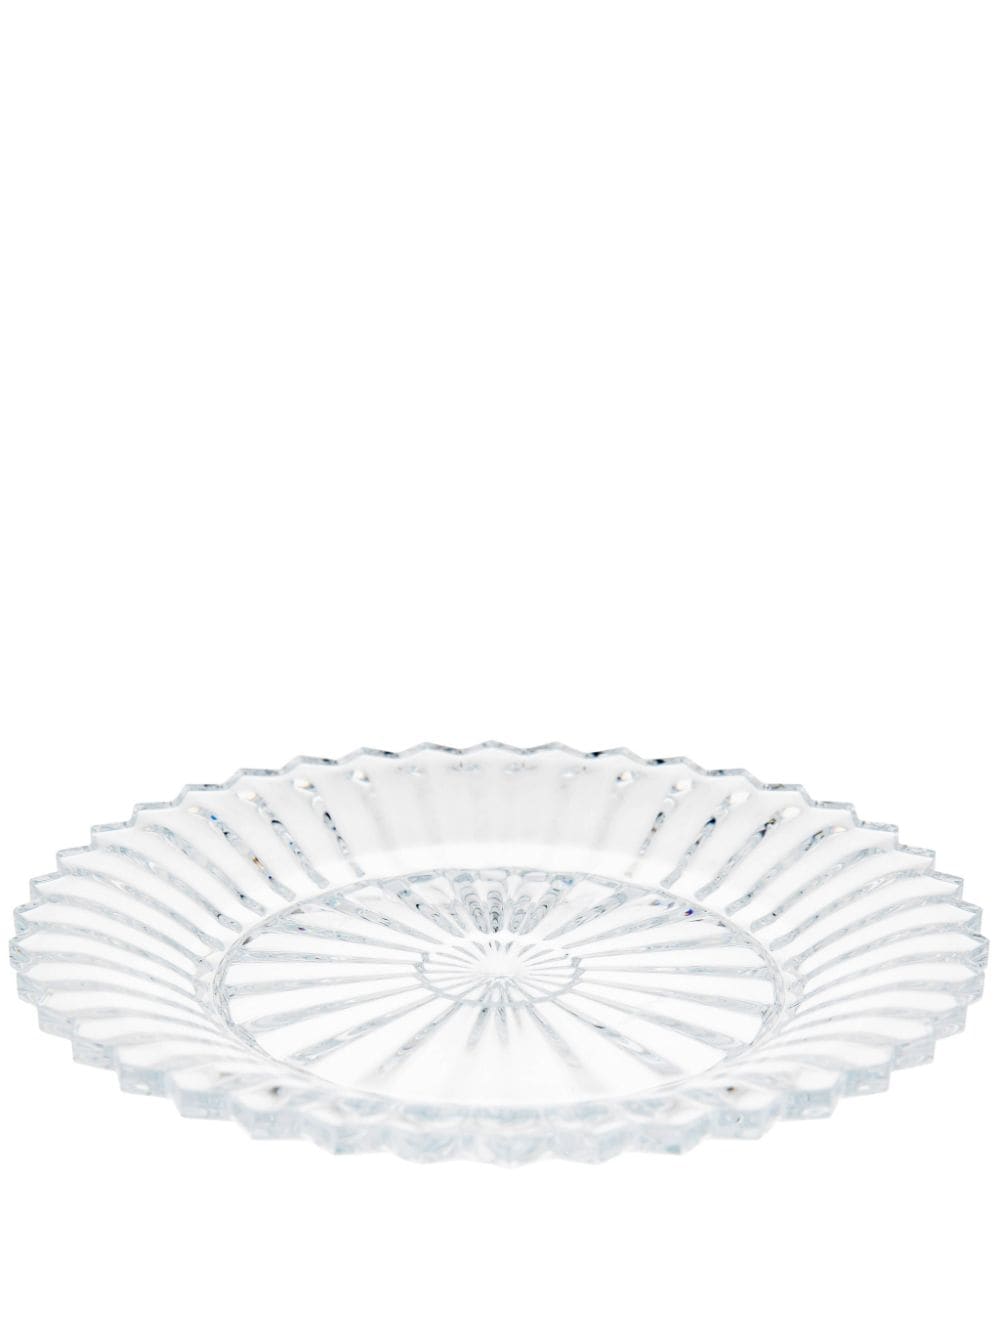 Baccarat Mille Nuits Crystal Dessert Plate In White